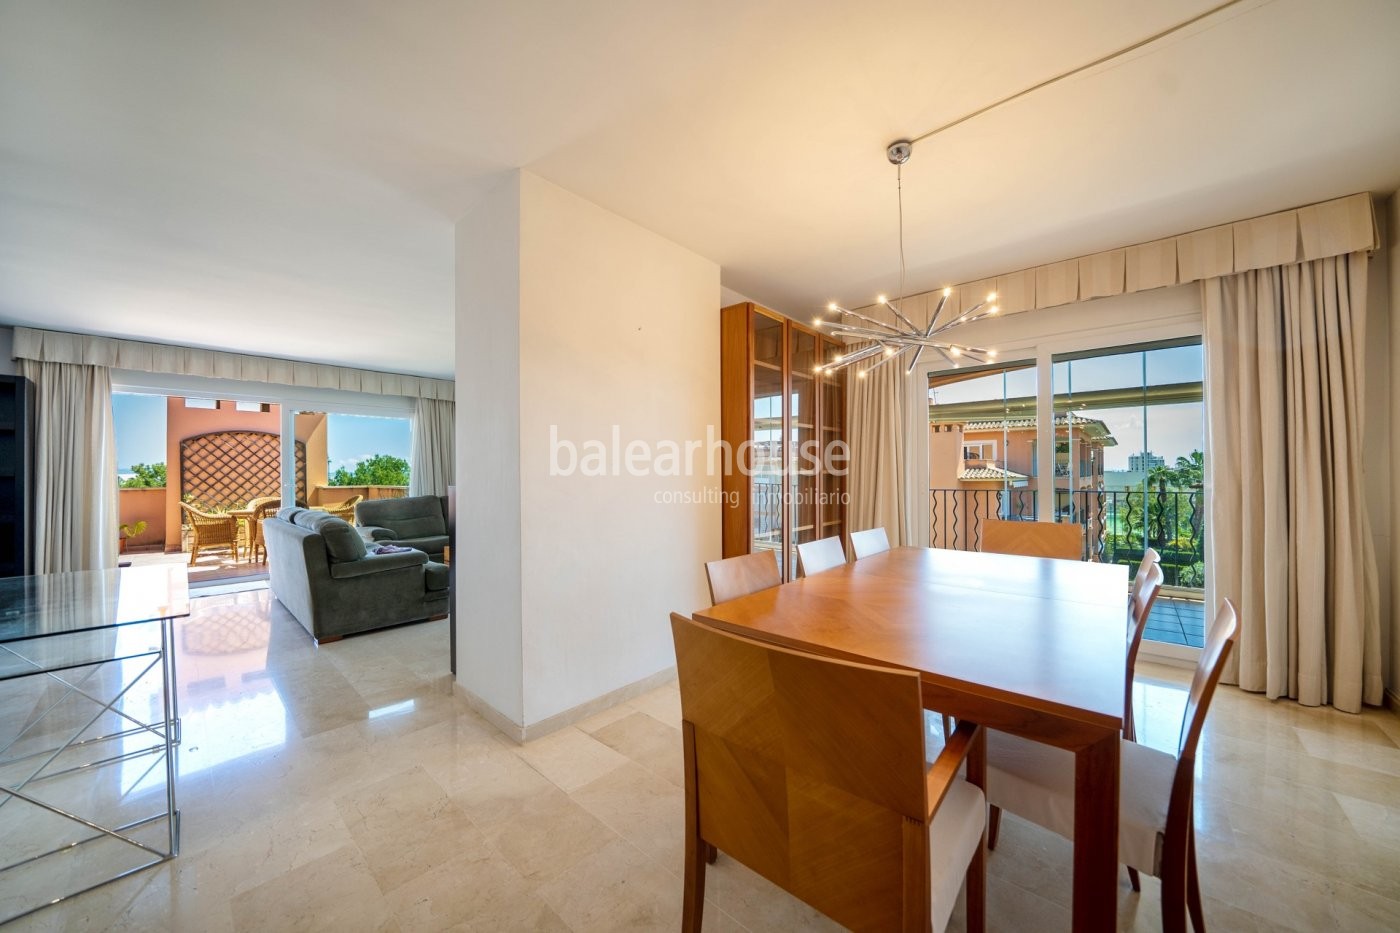 Large penthouse with terraces, private solarium and high qualities in green surroundings of Palma.